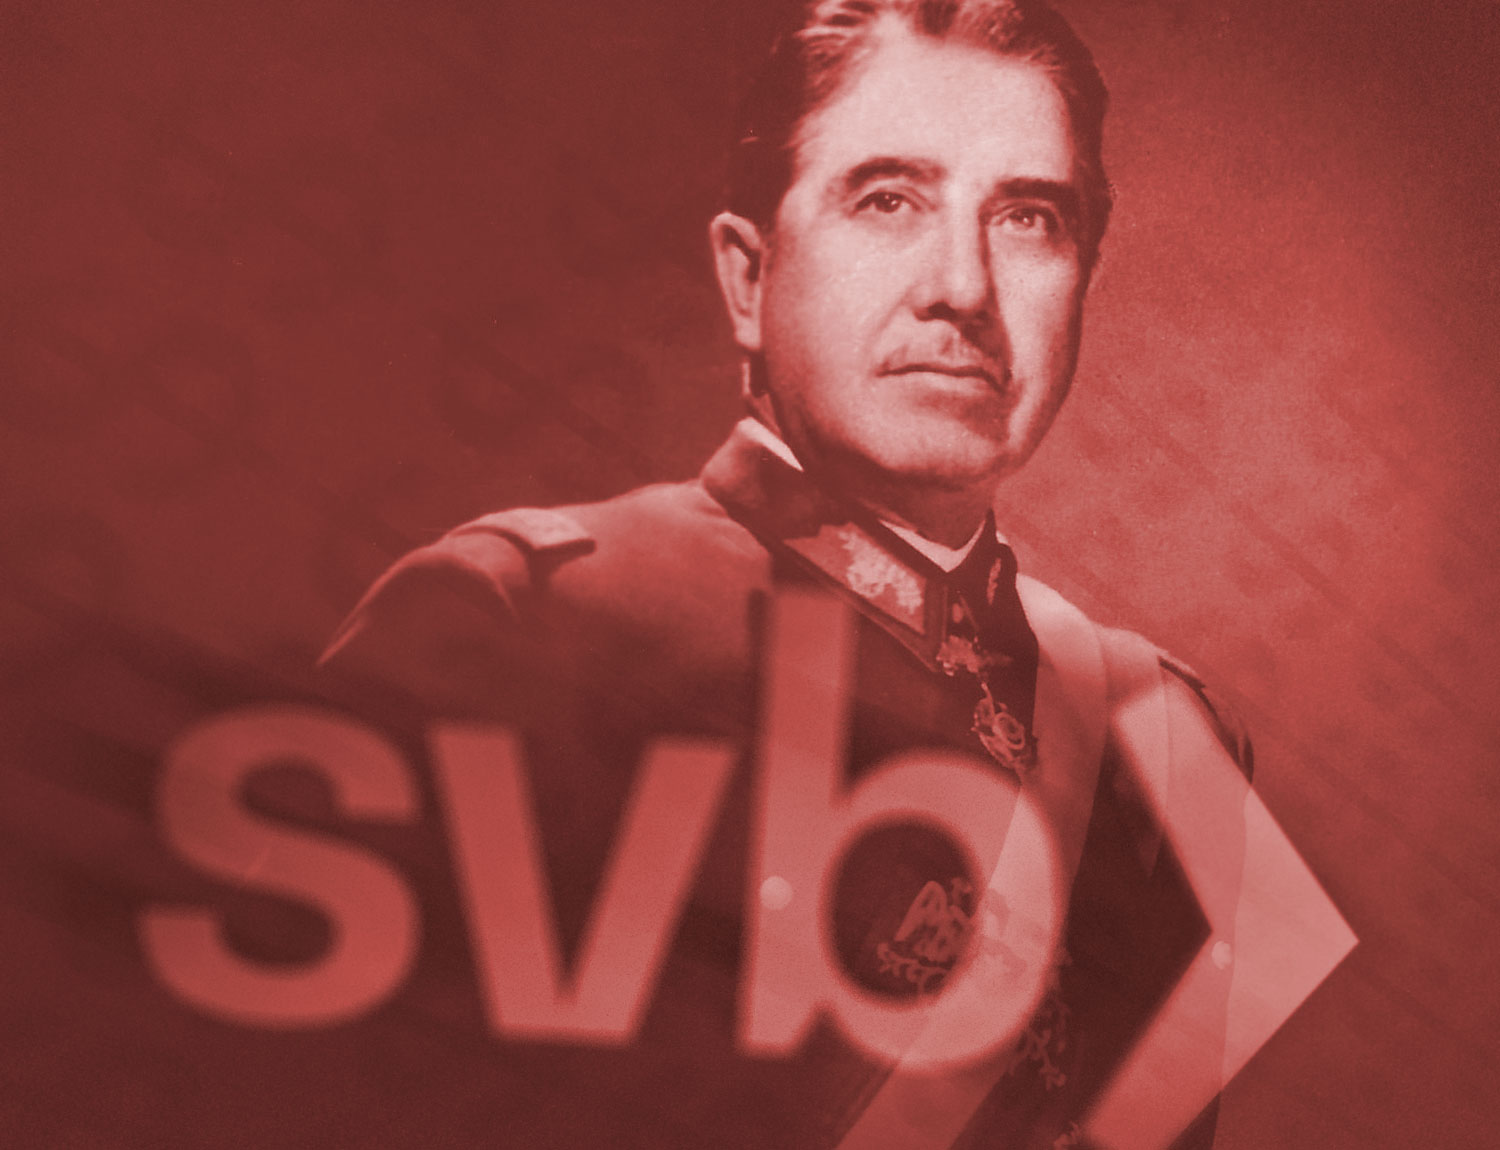 General Augusto Pinochet with the Silicon ValleyBank logo